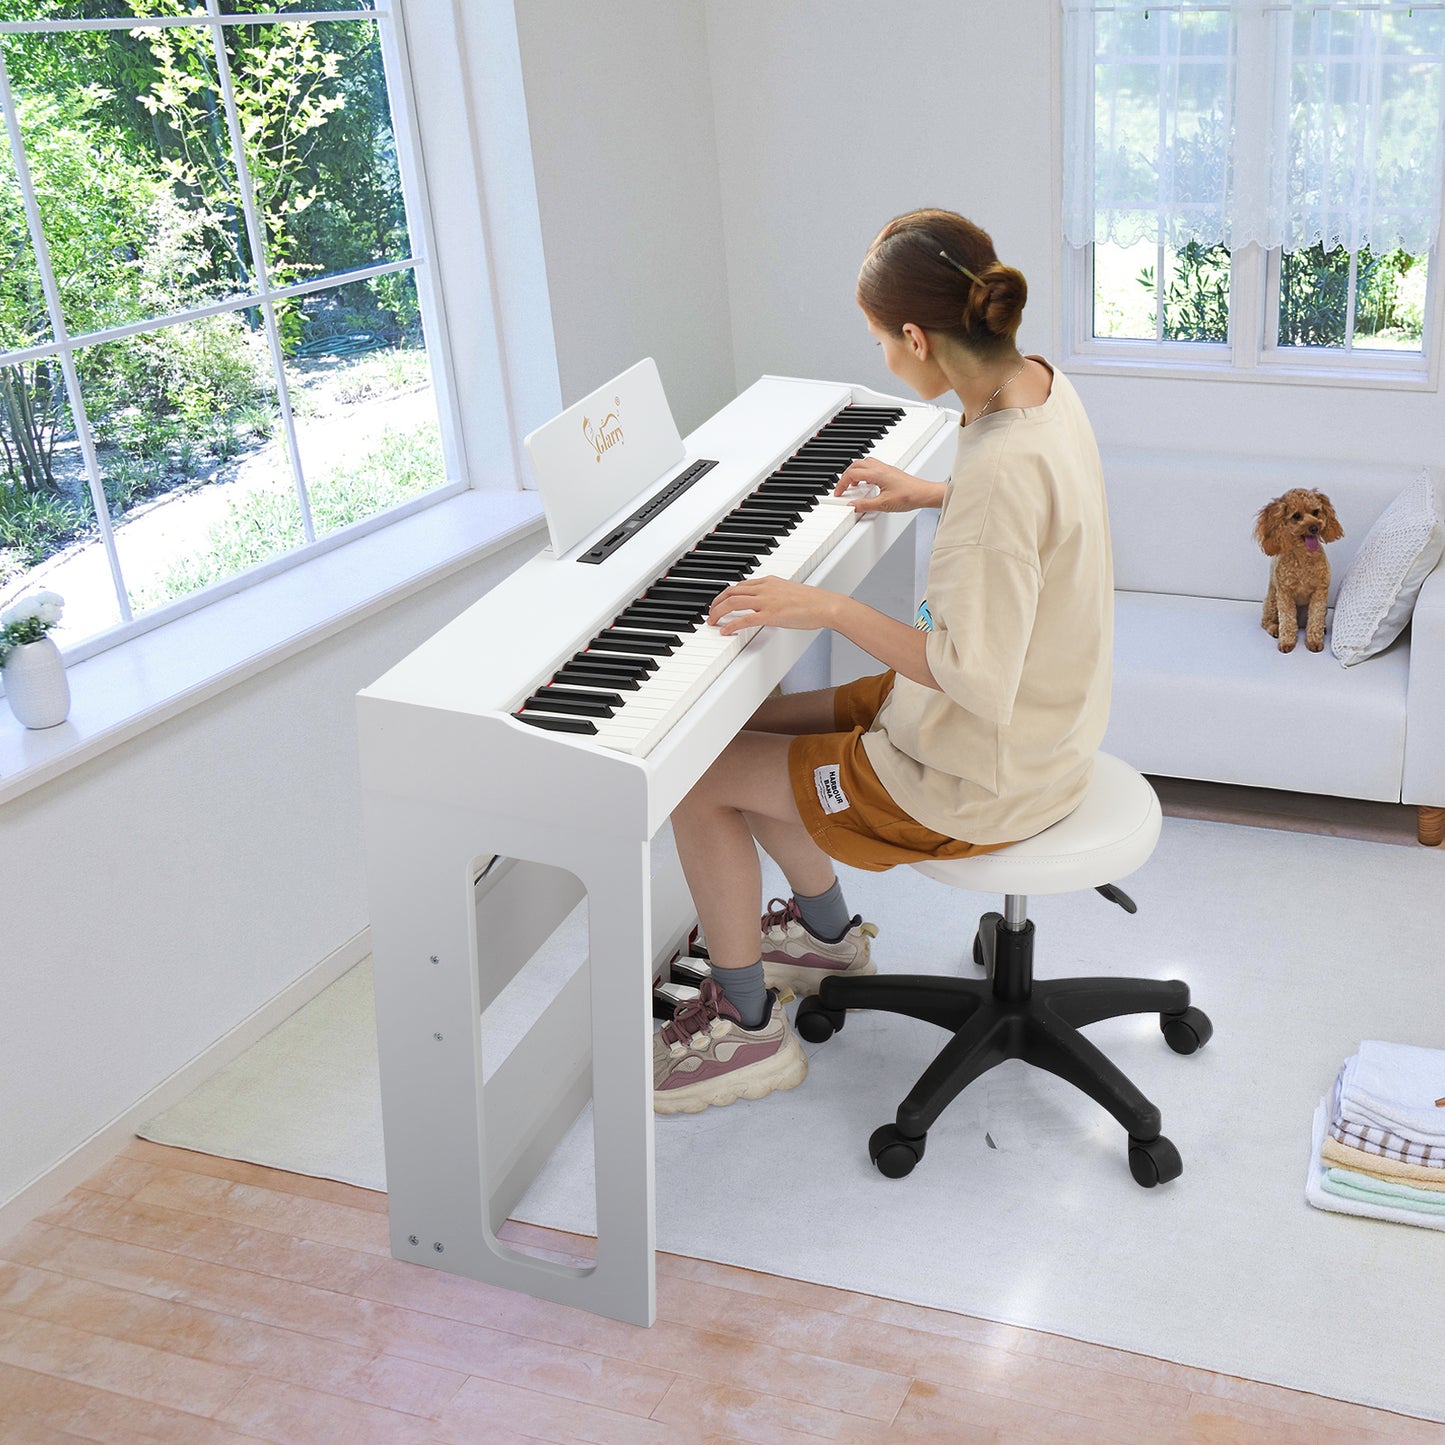 Glarry GDP-104 88 Keys Full Weighted Keyboards Digital Piano with Furniture Stand - White